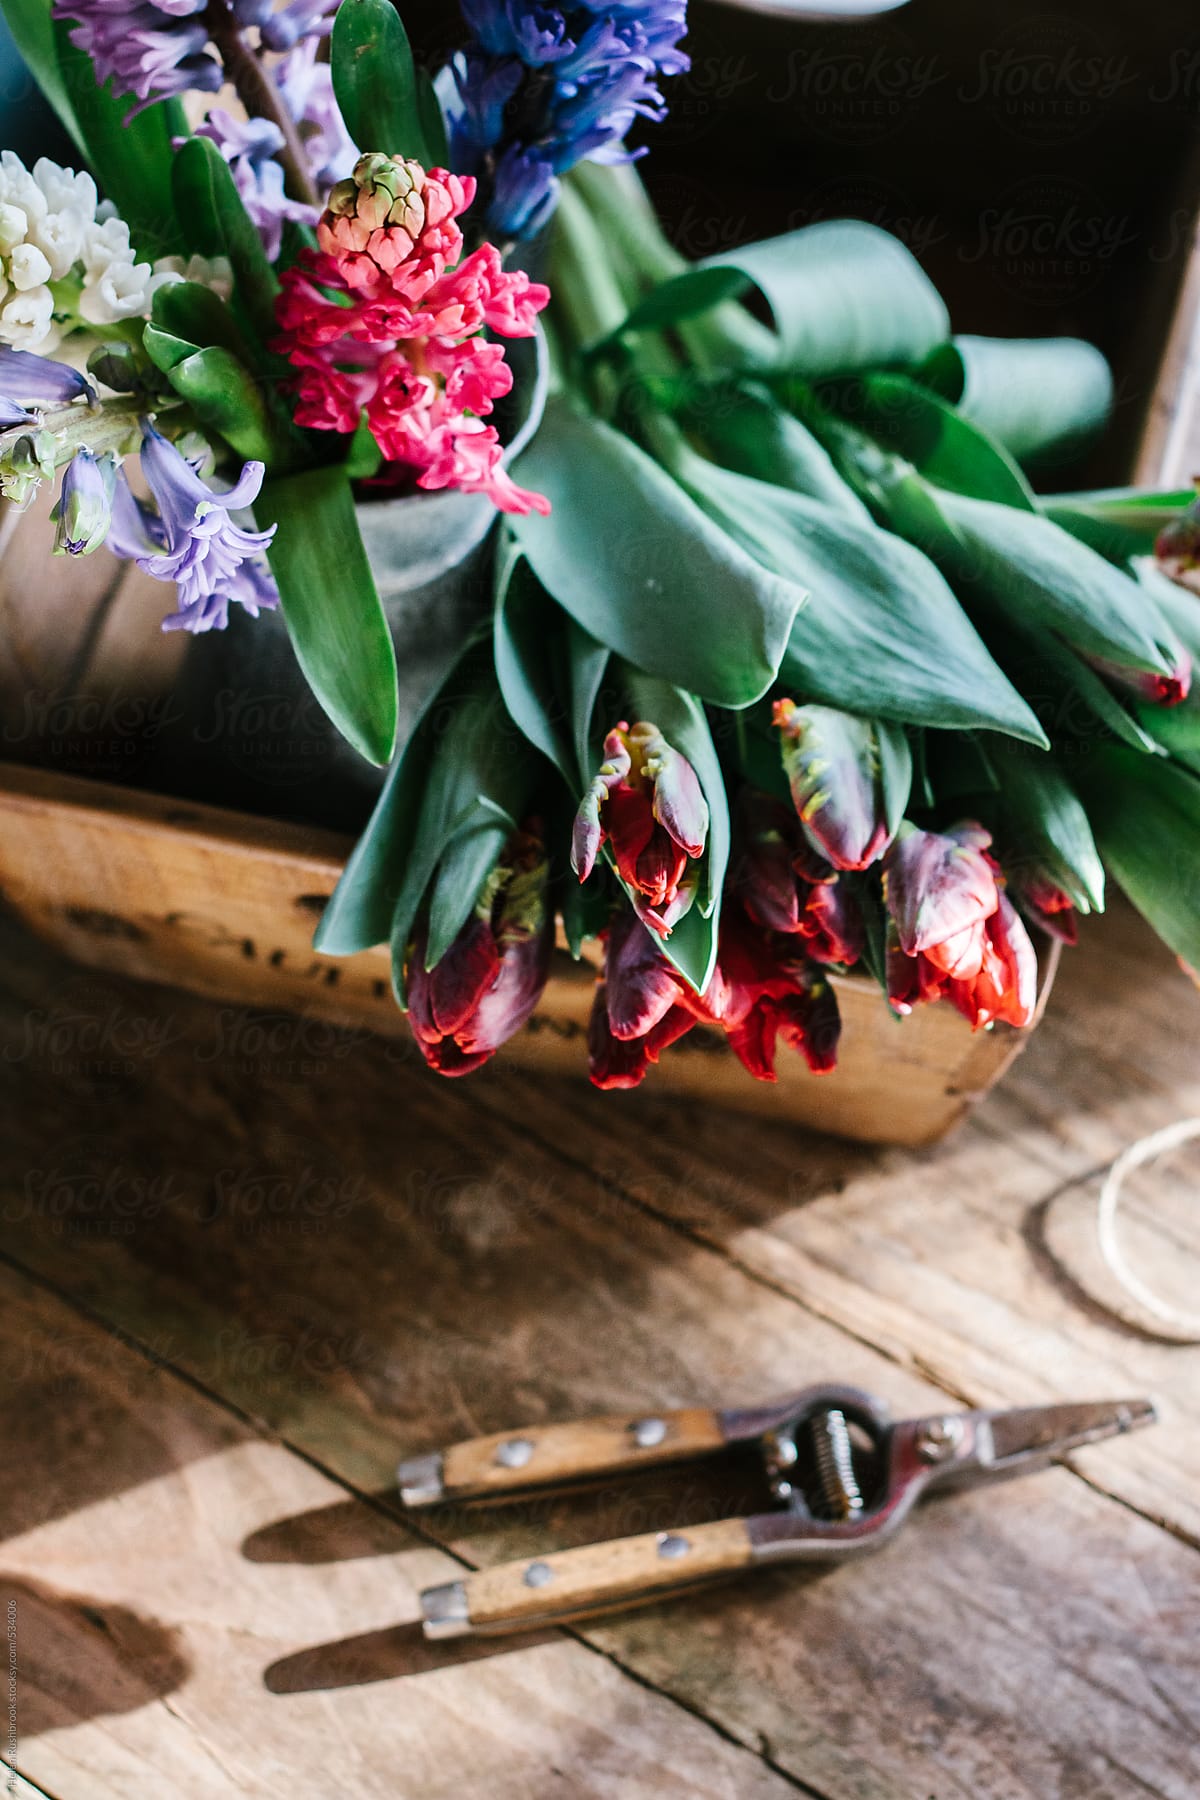 Red parrot tulips and hyacinths in a reclaimed wooden box.